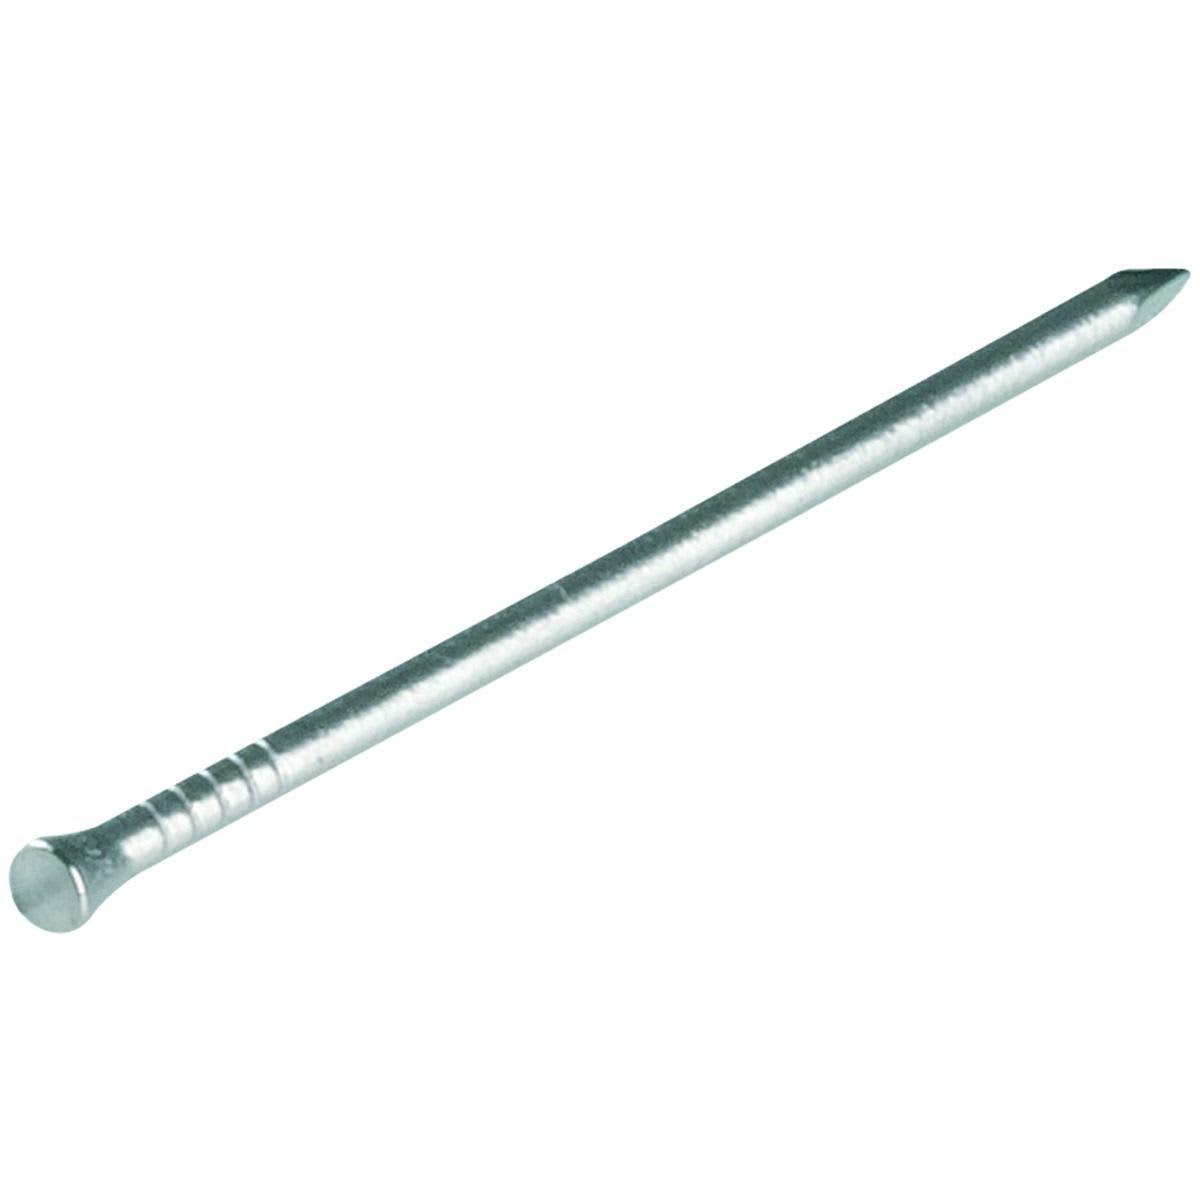 Wickes 40mm Stainless Steel Panel Pins - 100g